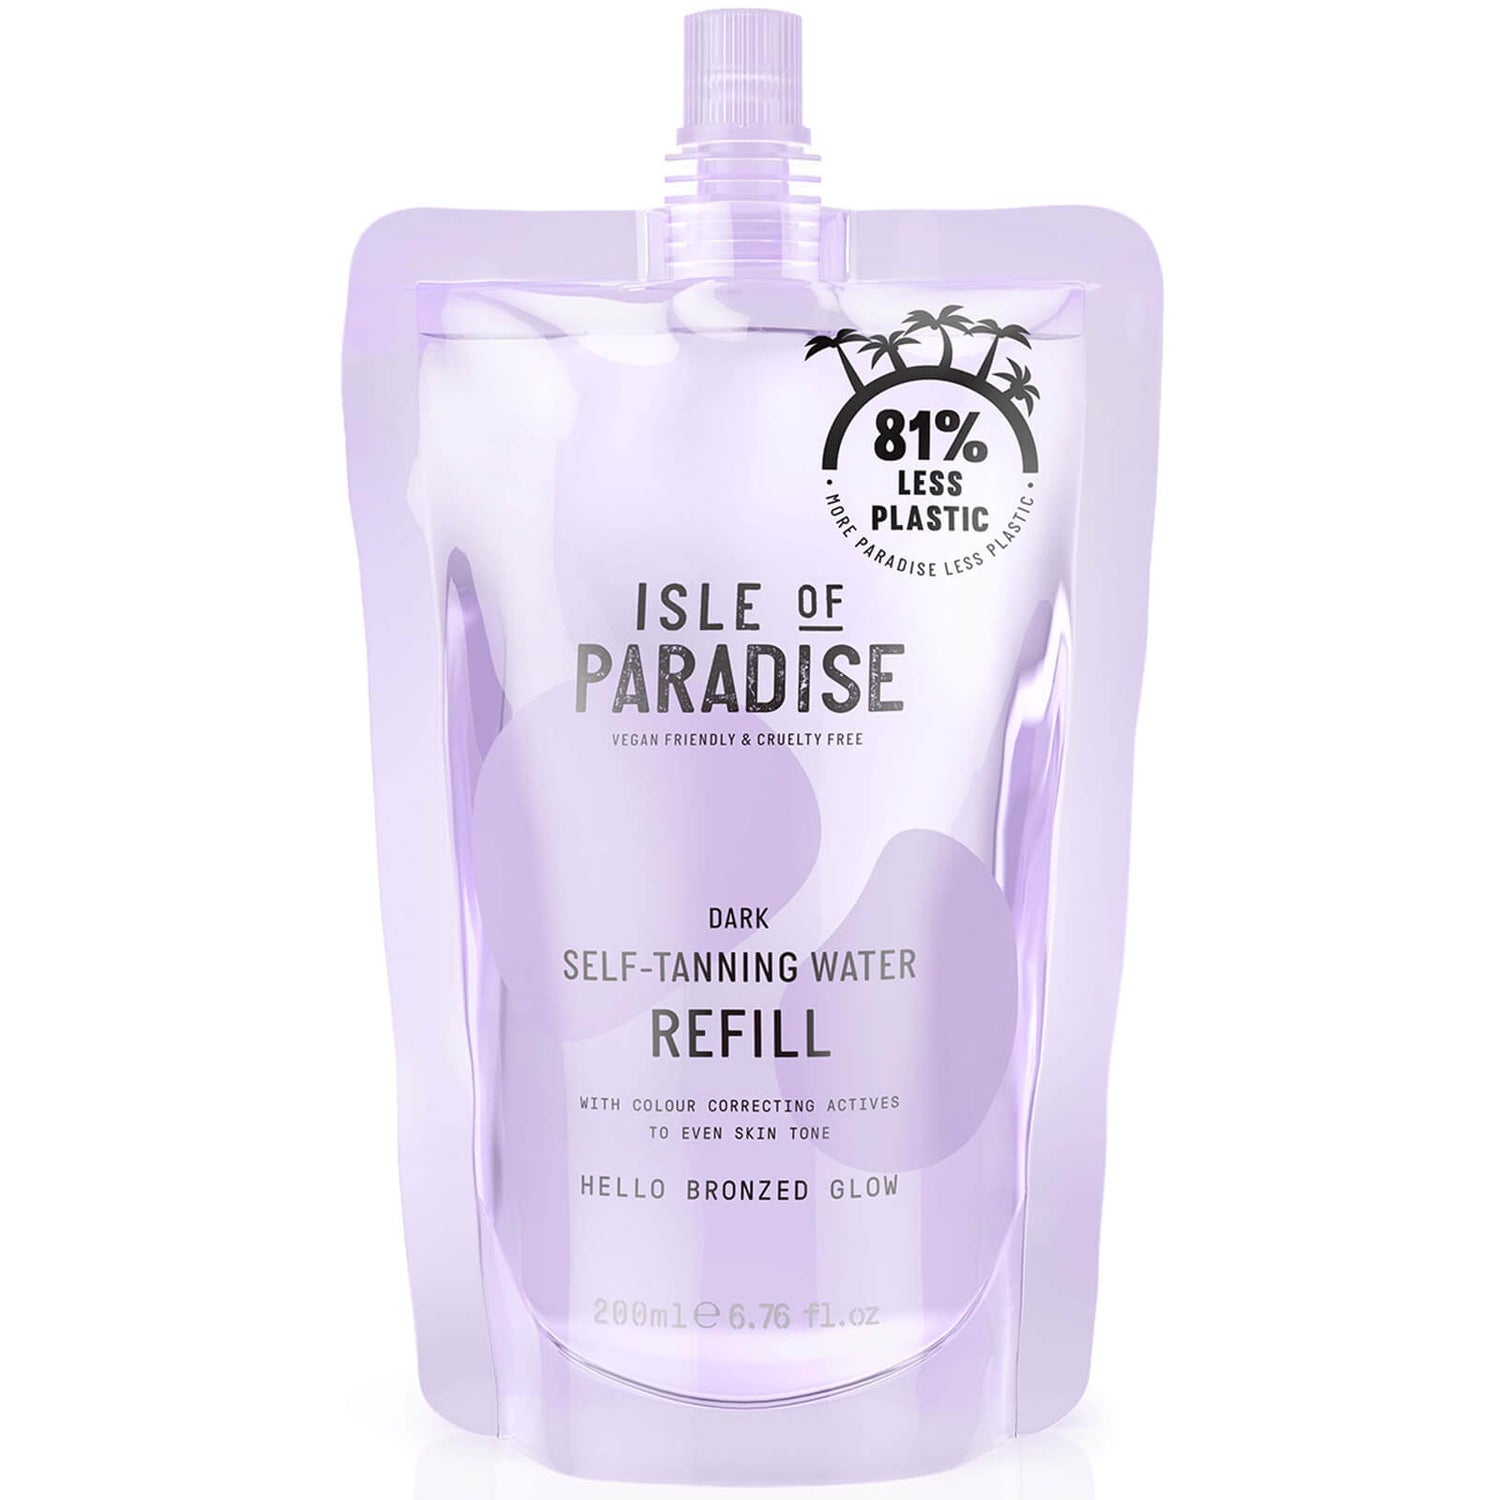 Isle of Paradise Self-Tanning Water Refill Pouch Dark 200ml